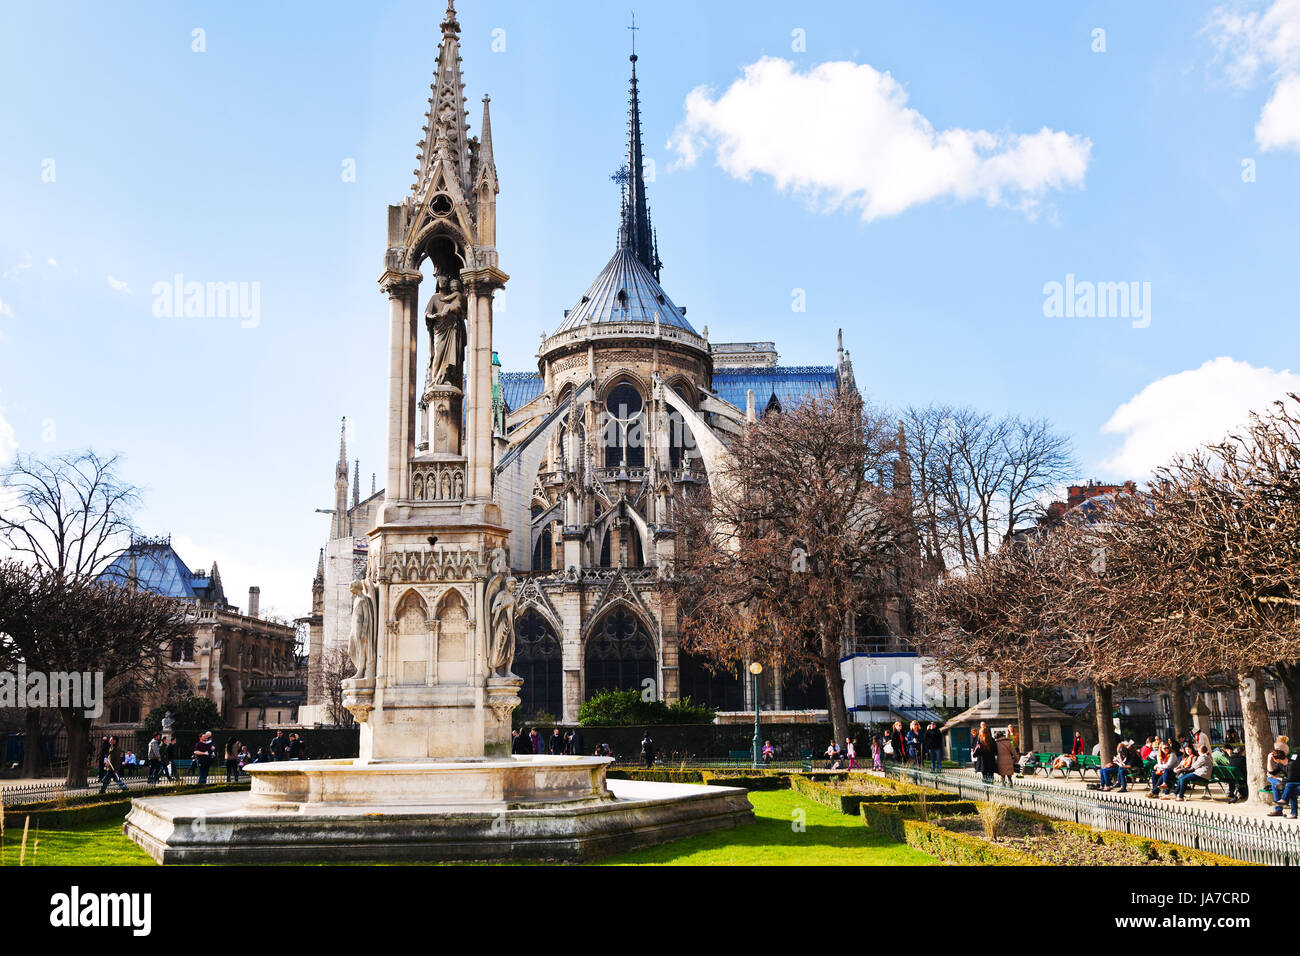 PARIS, FRANCE - MARCH 9: Notre-Dame de Paris and Fountain of the Archdiocese from Square Jean XXIII in Paris on March 9, 2013. Fontaine de l Archeveche was made in 1843-1845 by Alphonse Vigoureux Stock Photo